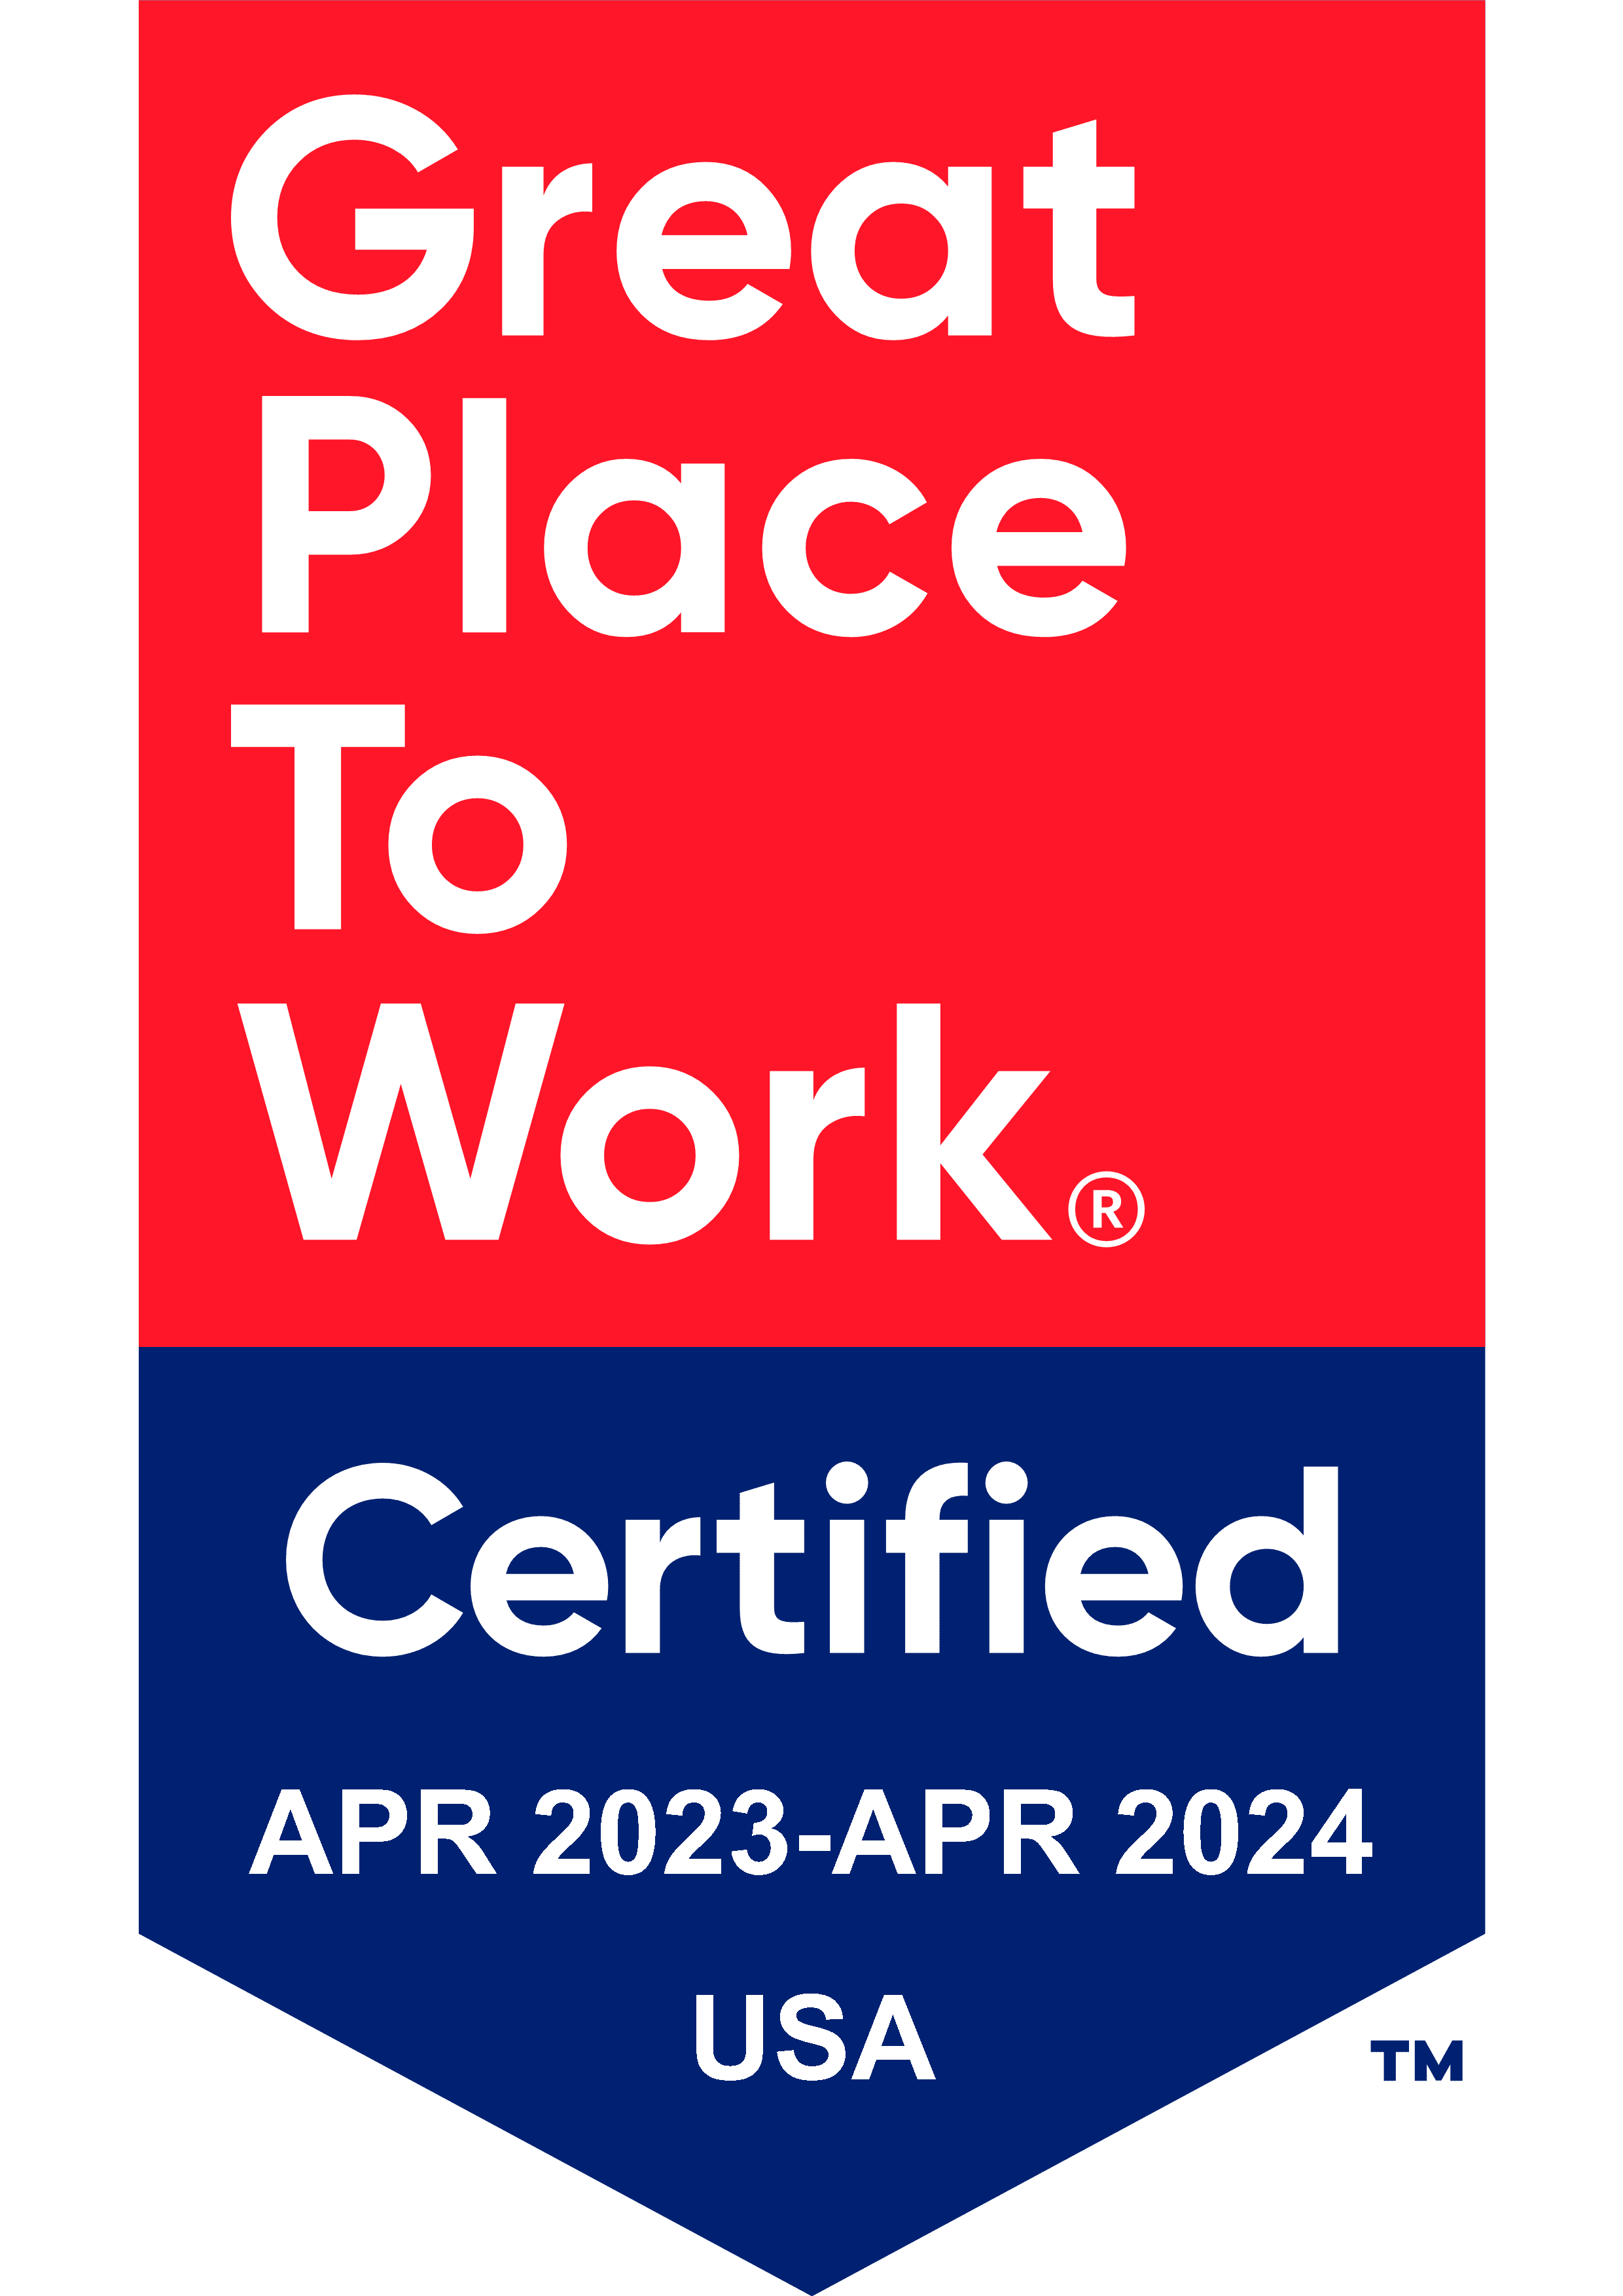 Great places to work badge for The Keystones of Cedar Rapids